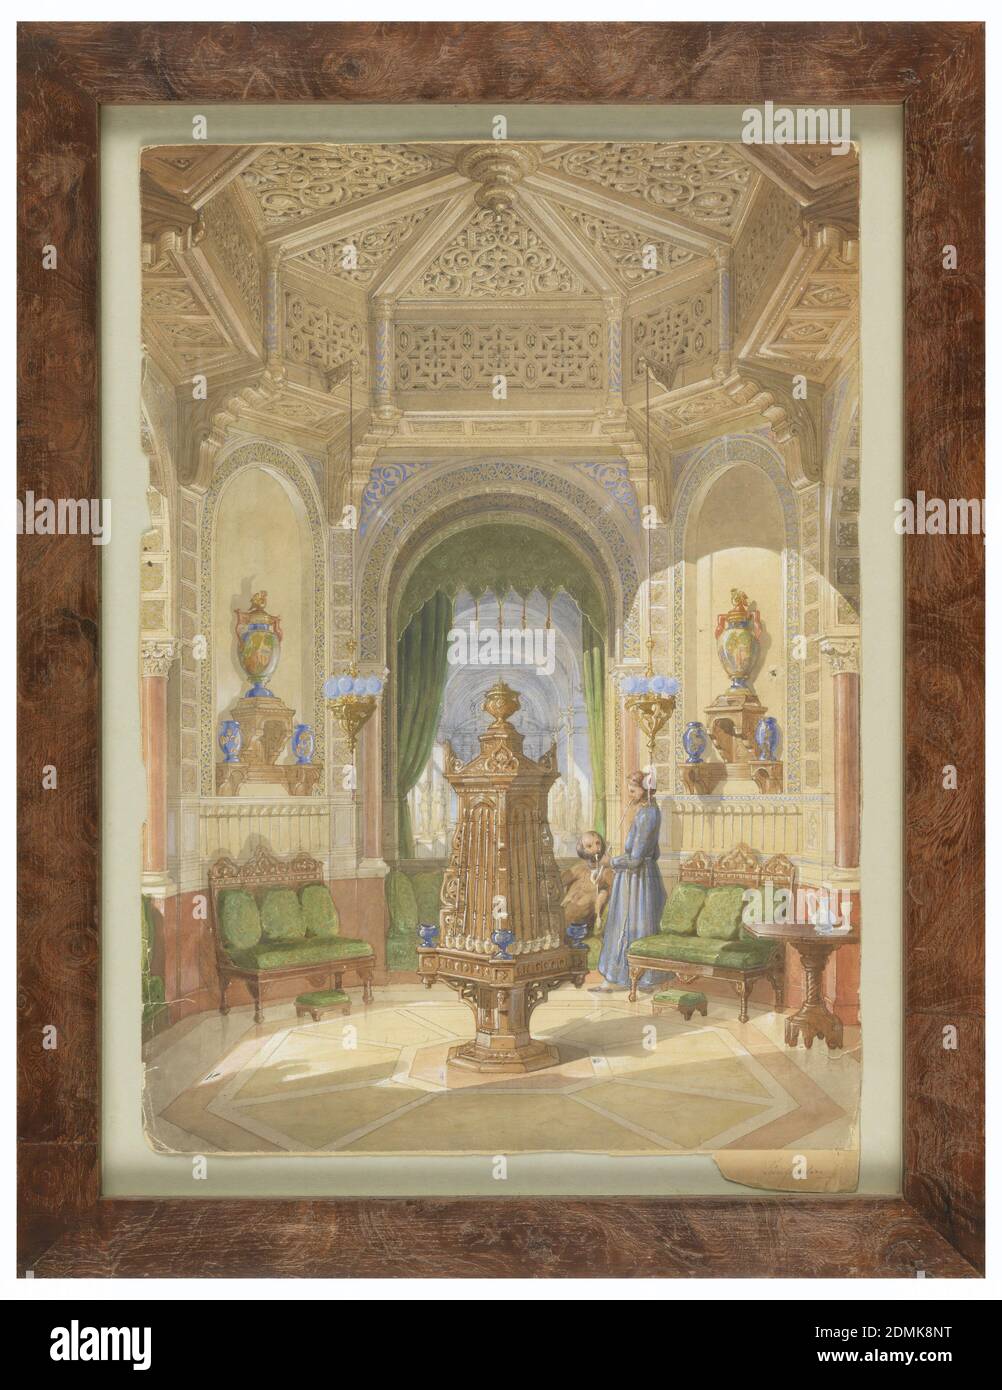 Design for a Moorish Smoking Room [Tabagie], Léon Feuchère, French, 1804 - 1857, Brush and watercolor, gouache, graphite on wove paper, Octagonal room of stone or painted stone with arched openings on four sides and a cupula of Moorish-inspired interlace. The central rear arch leads to a receding colonnade while lateral niches display two large neoclassical urns with painted Moorish decoration. Below the side niches are European versions of Turkish ottomans covered with French mid-century textiles. A large pipe stand of Germanic origin occupies the center of the kiosk and an octagonal table Stock Photo